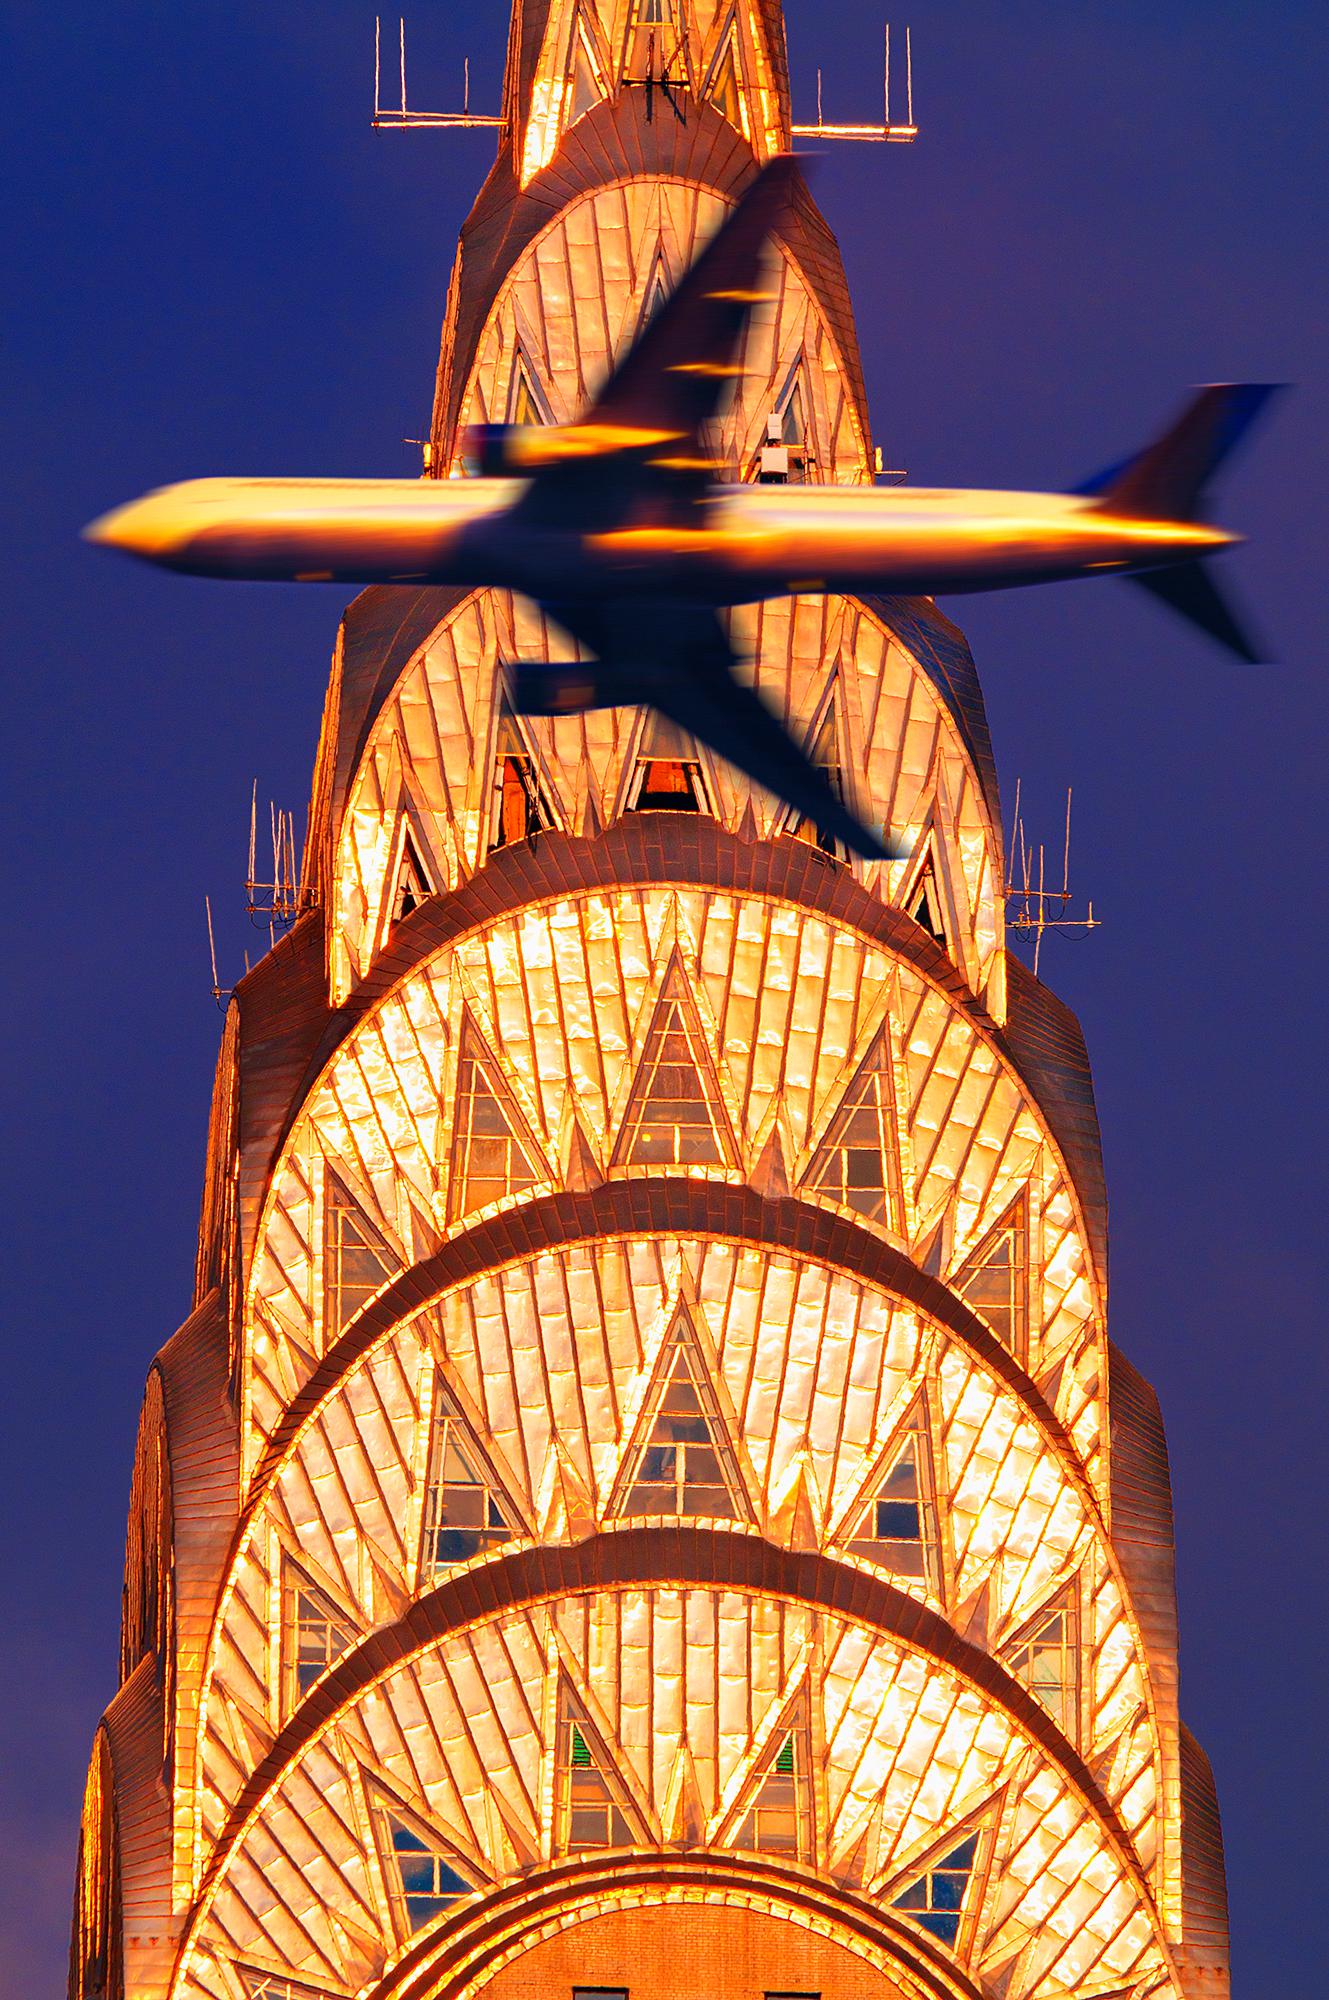 Mitchell Funk Color Photograph - Chrysler Building Spire in Golden Light Intersected with Airplane,  Art Deco